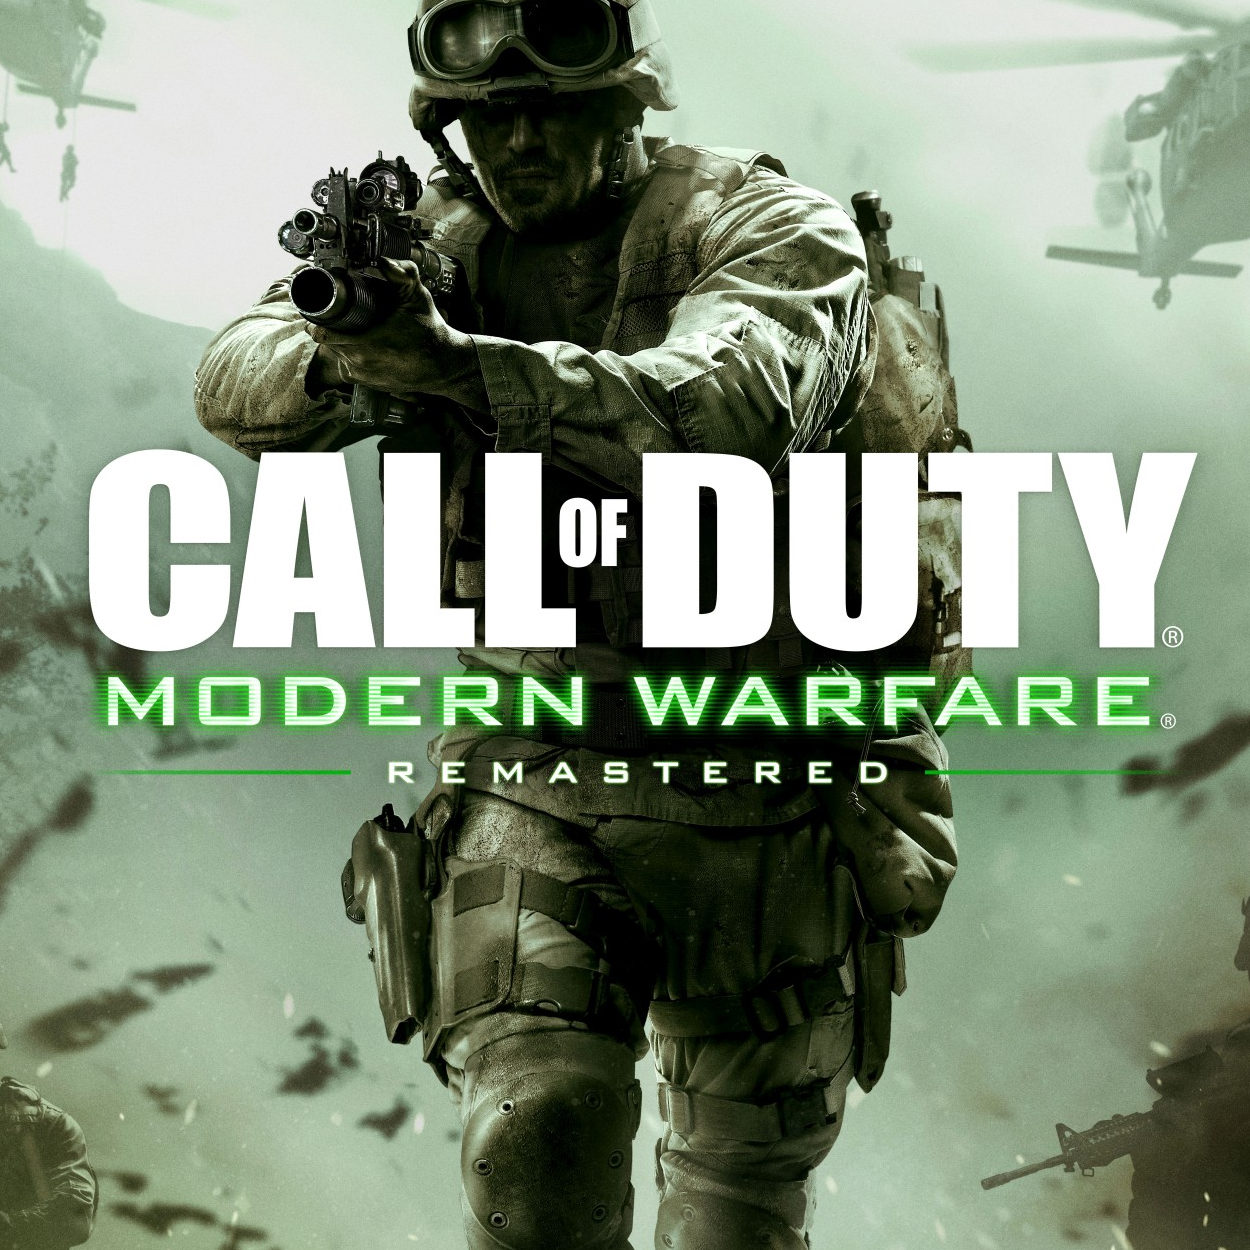 Call of duty remastered ps4. Call of Duty 4 Modern Warfare Remastered. Call of Duty Modern Warfare 3 Remastered. Call of Duty Модерн варфаер 4. Call of Duty MW 4 Remastered.